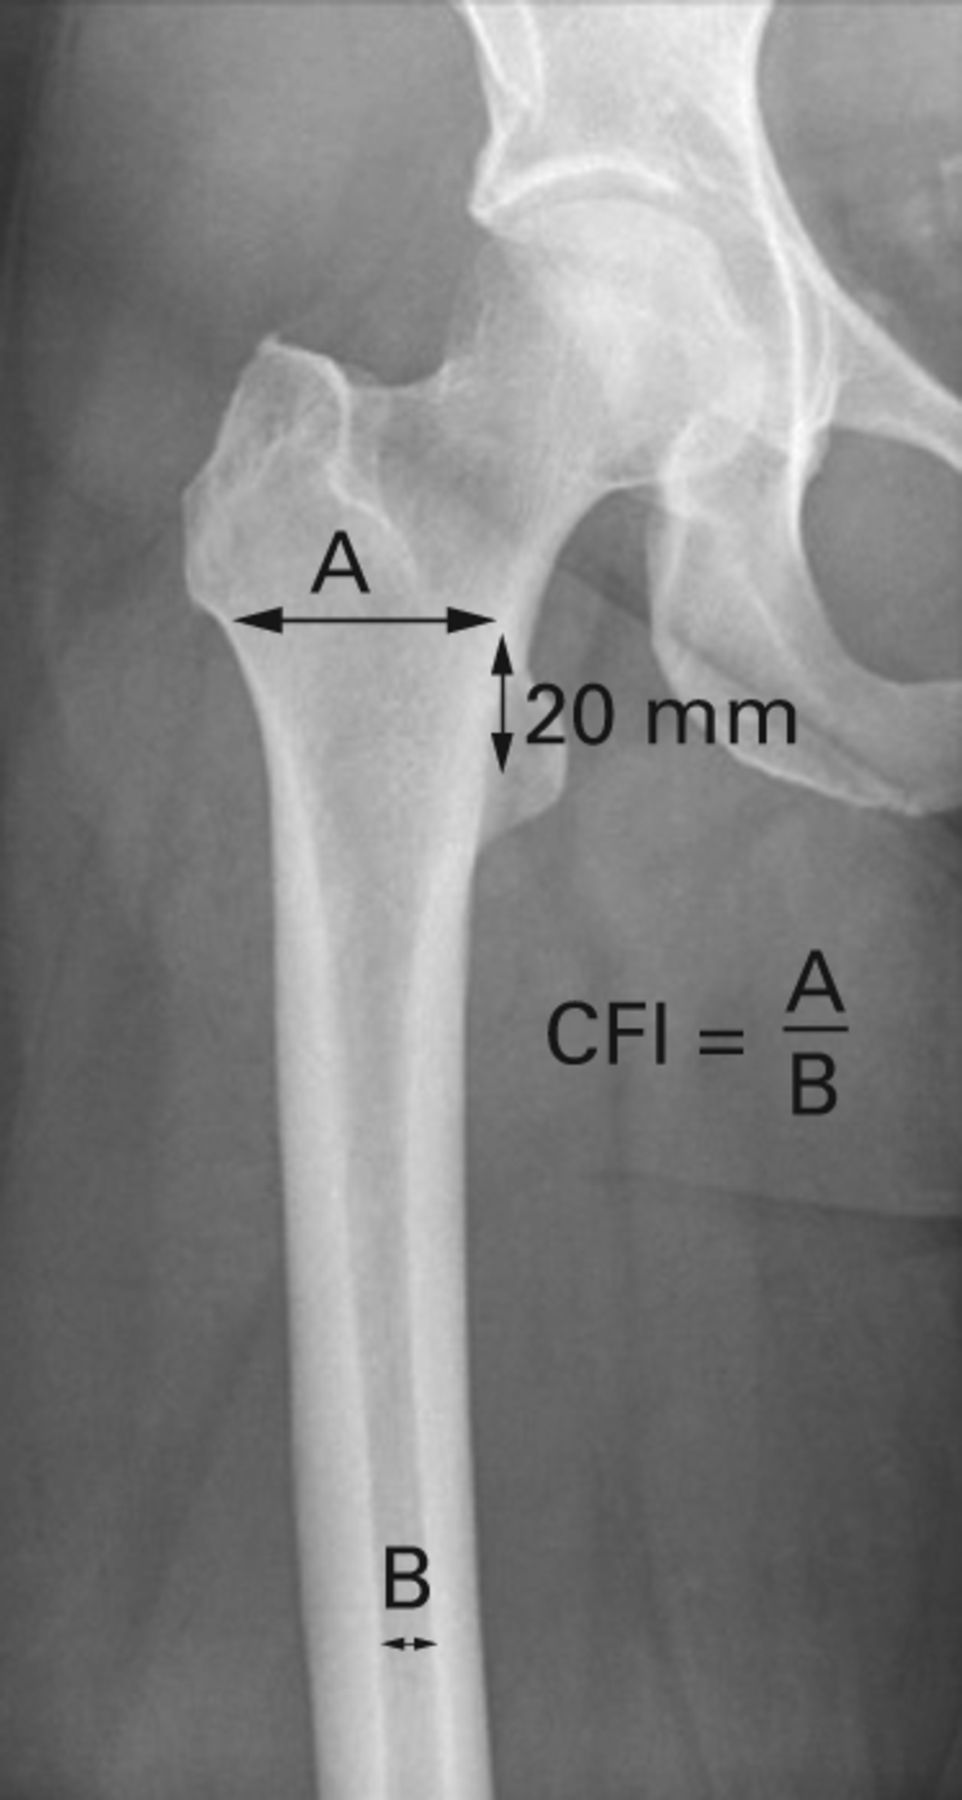 Fig. 2 
          Radiograph showing the canal flare index
(CFI): ratio of the canal diameter 20 mm above the level of the
lesser trochanter midpoint (A) and the canal diameter at the level
of the isthmus (B).
        